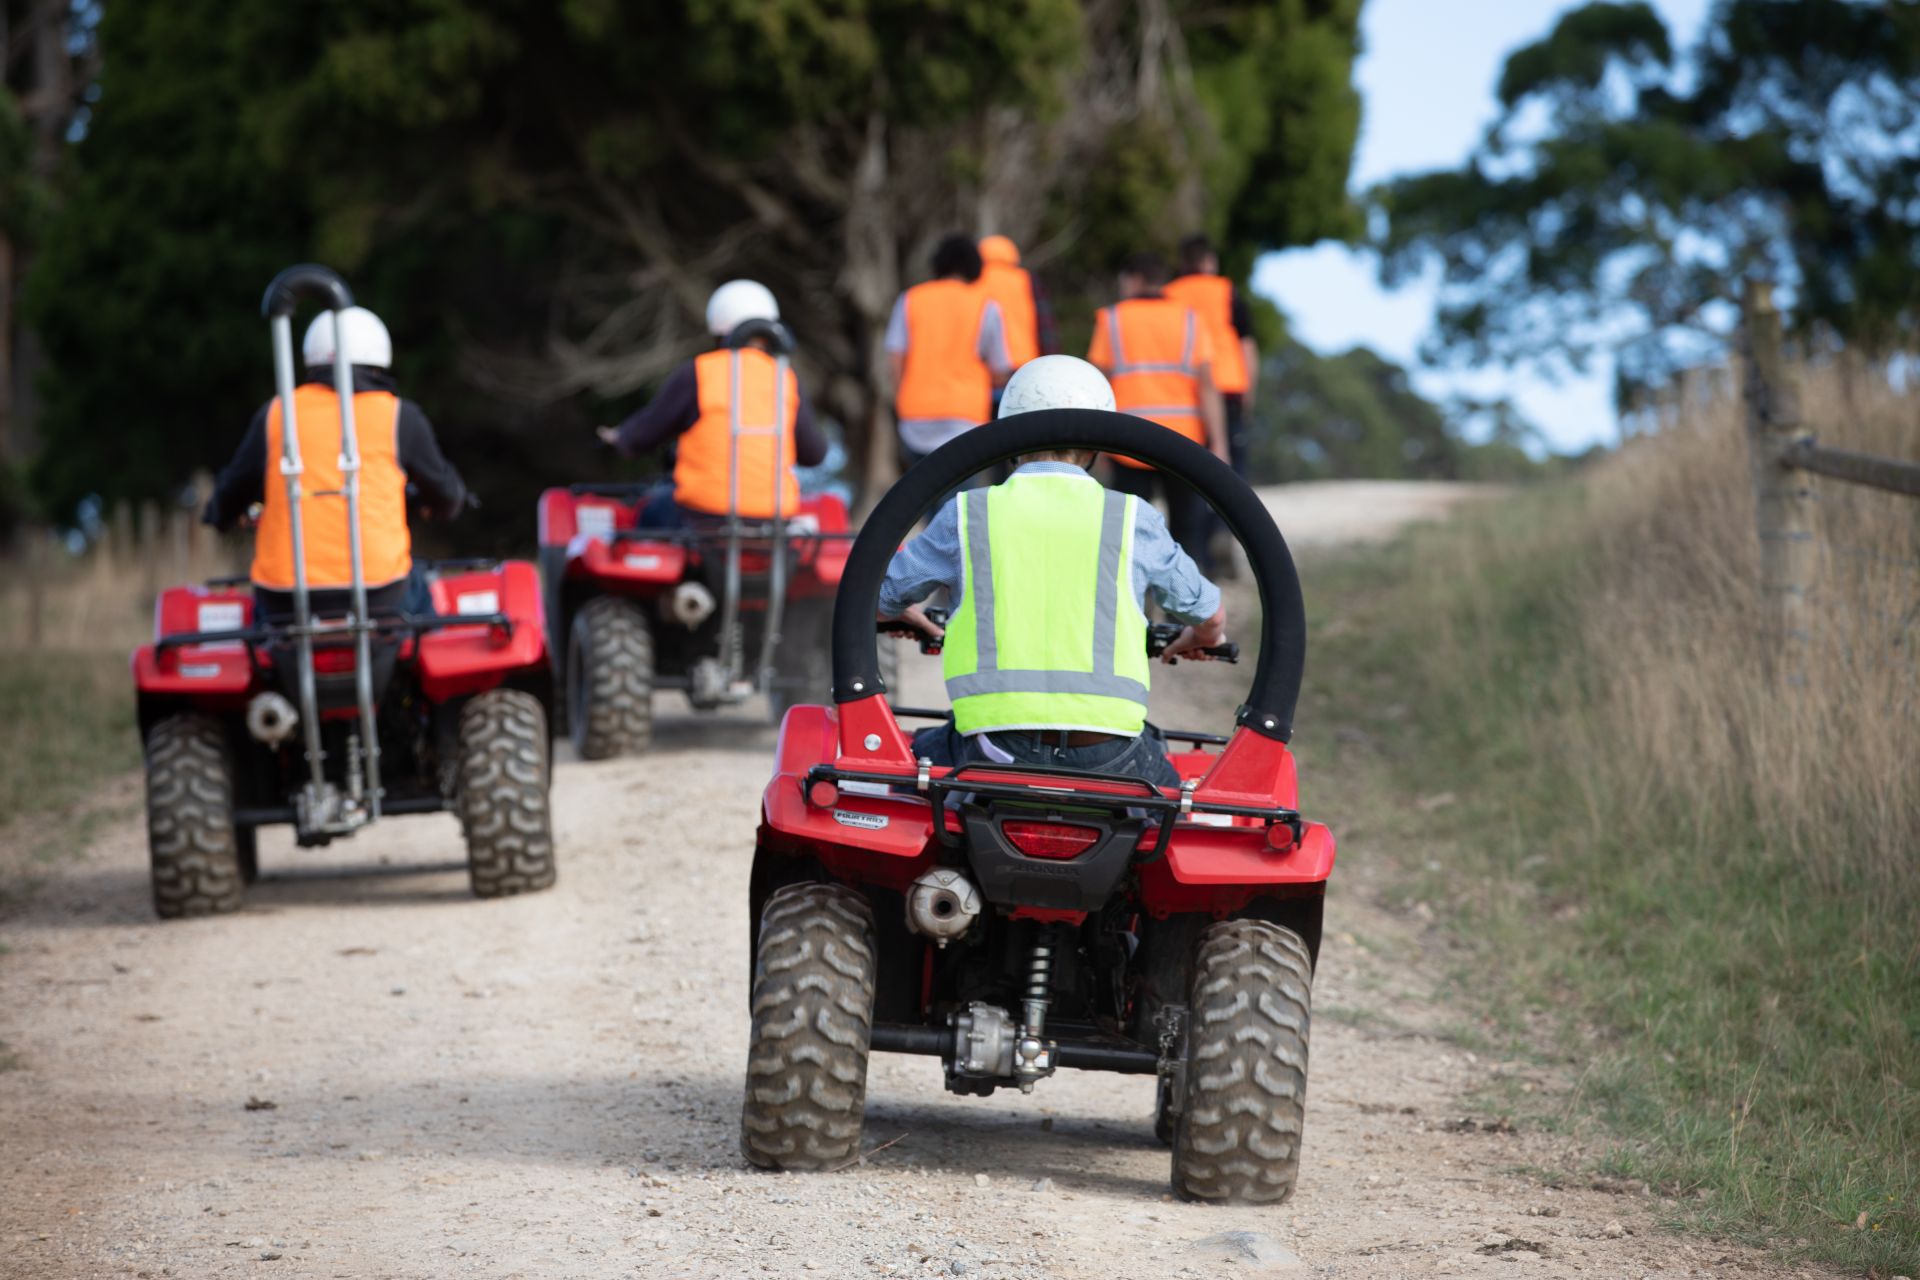 Quad bikes riding down the road at TasTAFE's Freer Farm during an Operate Quad bikes course.